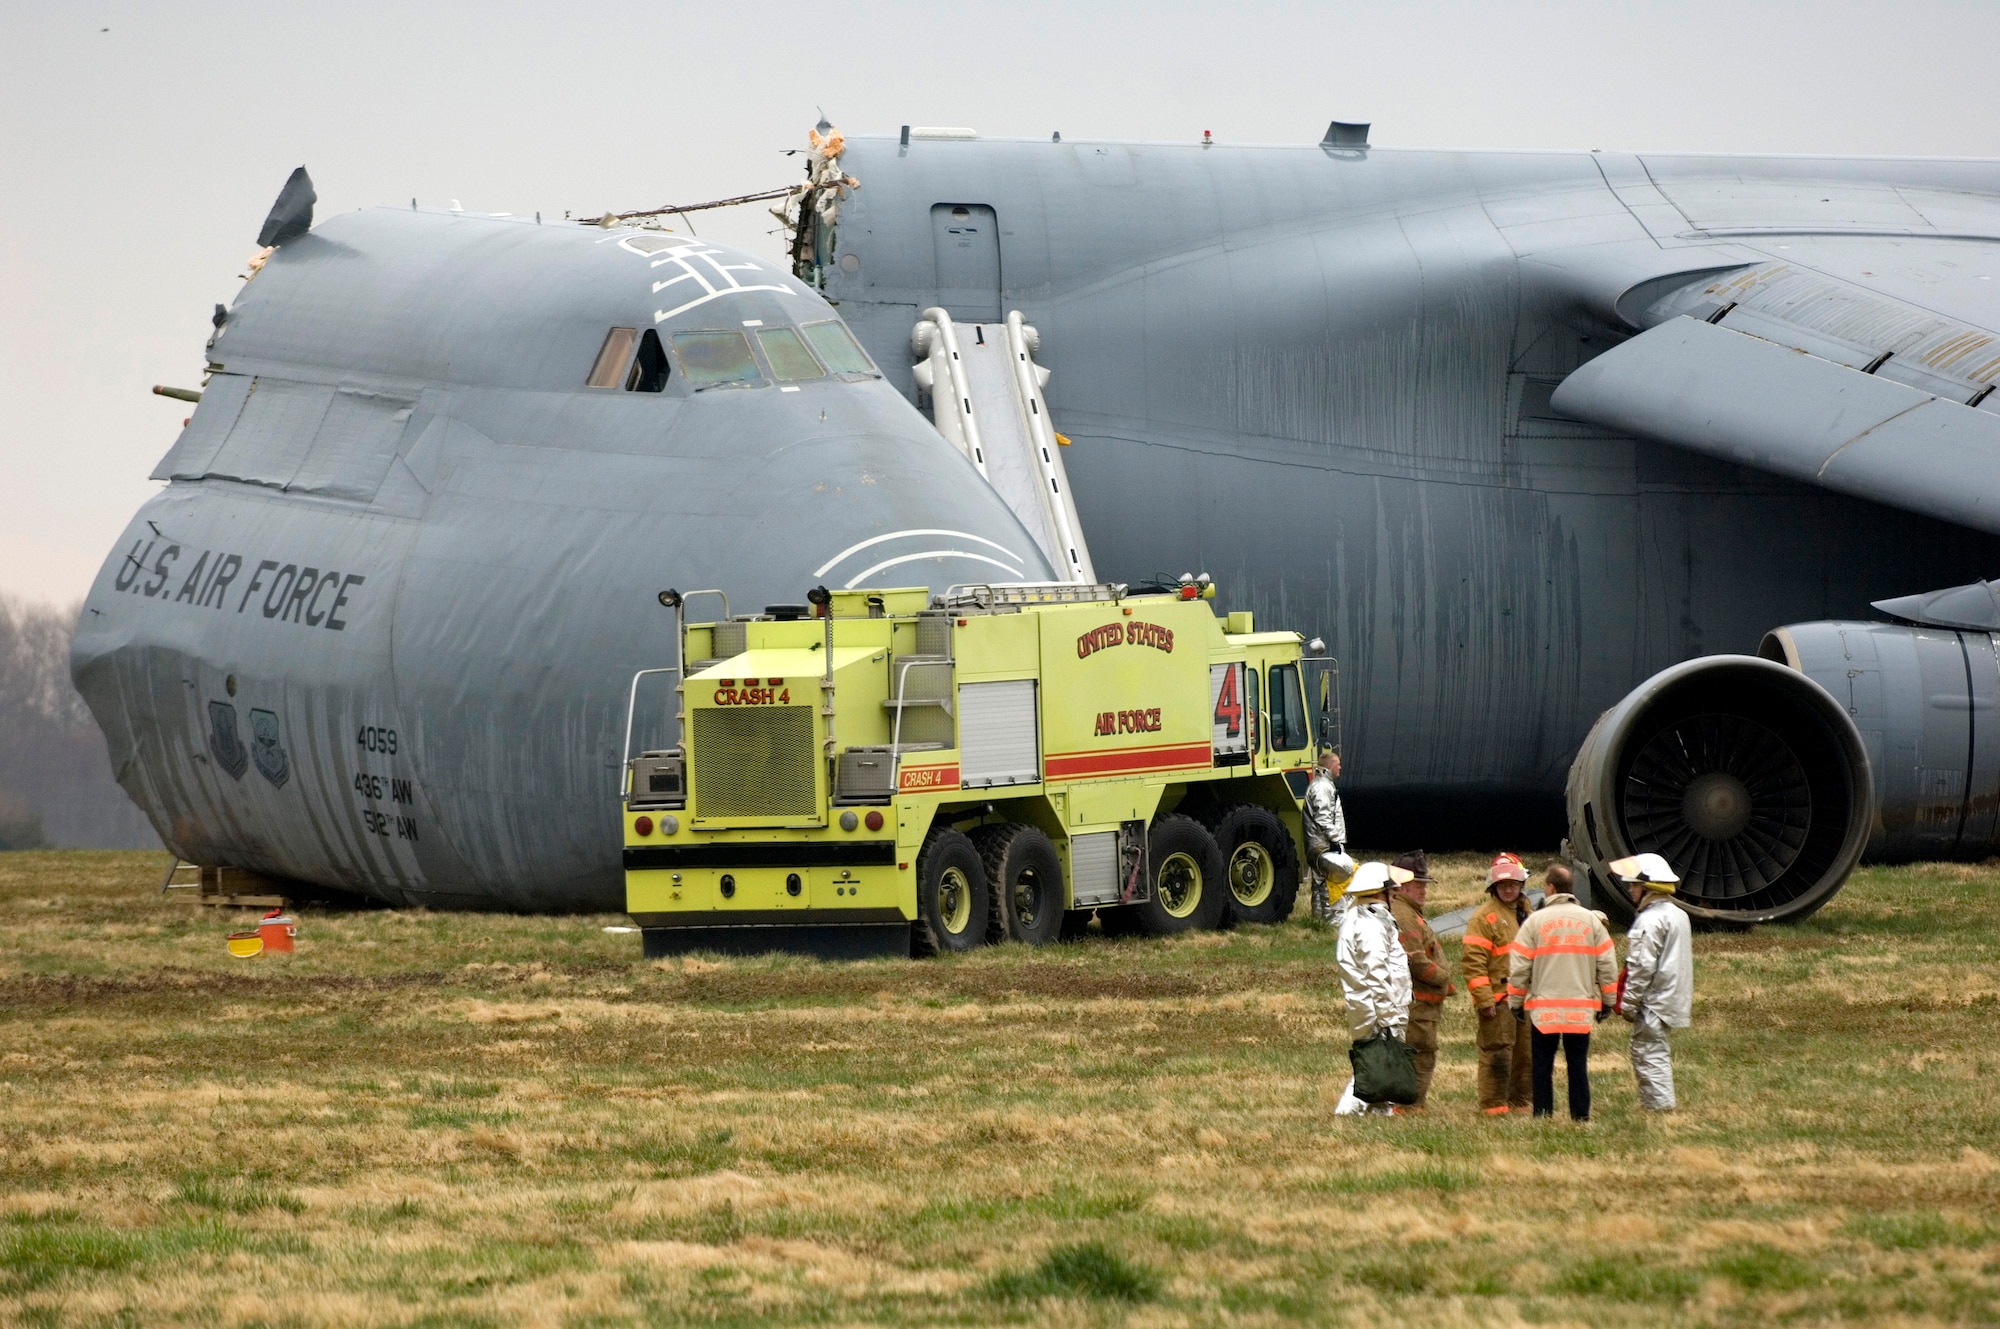 Emergency responders are on the scene of a C-5 Galaxy crash today, April 3, 2006 at Dover Air Force Base, Del. (U.S. Air Force photo/Doug Curran)